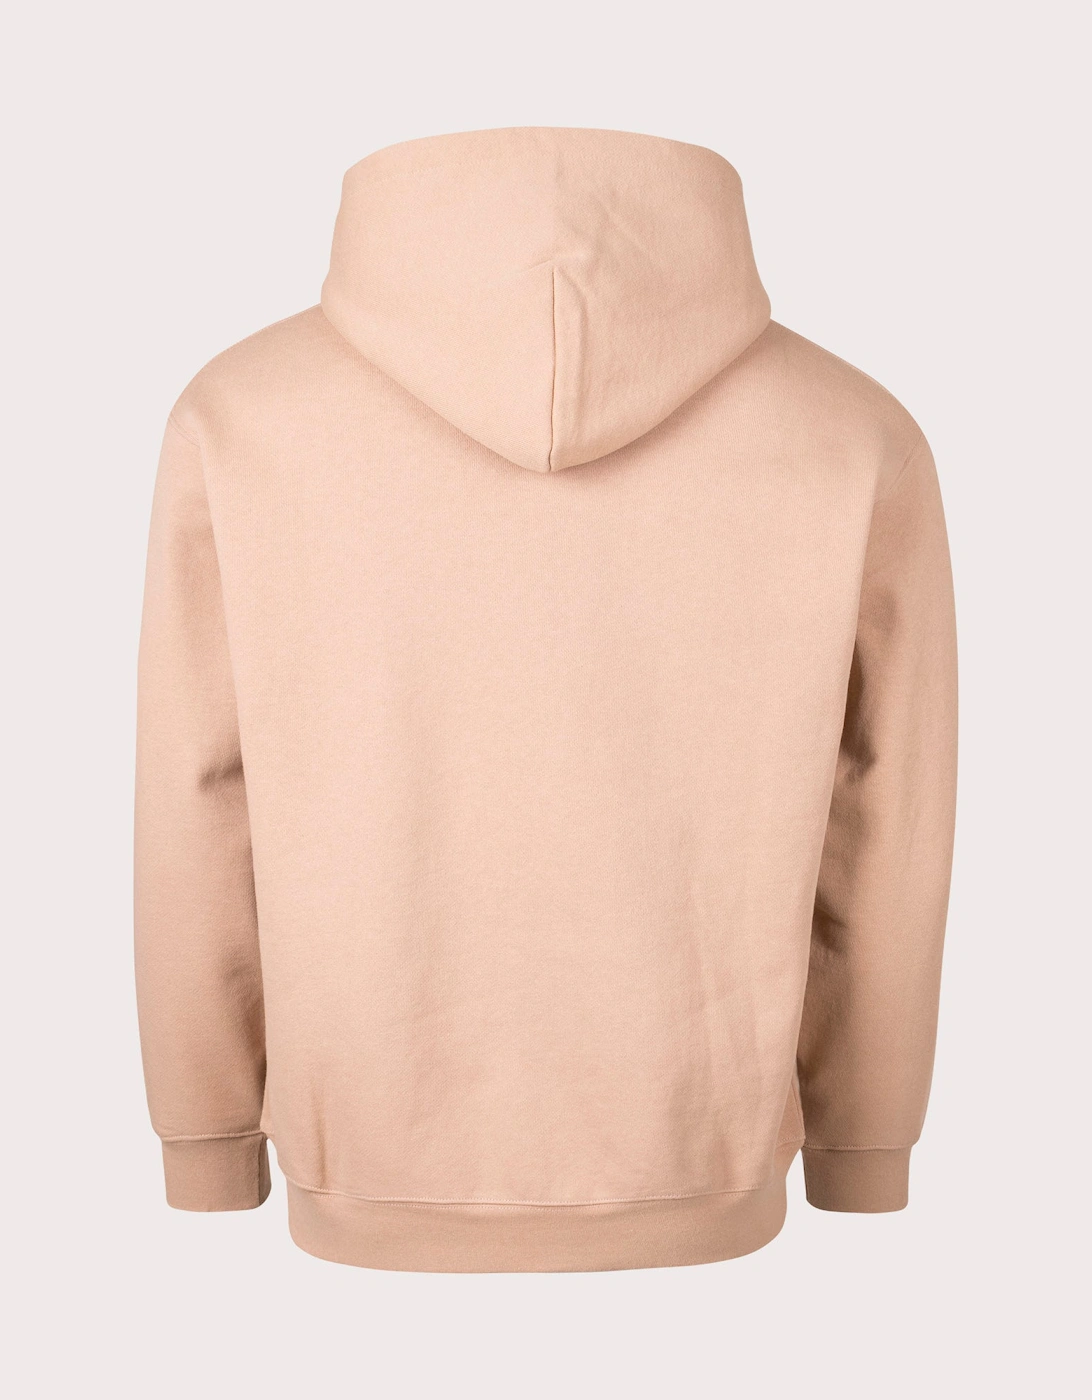 Classic Remastered Hoodie